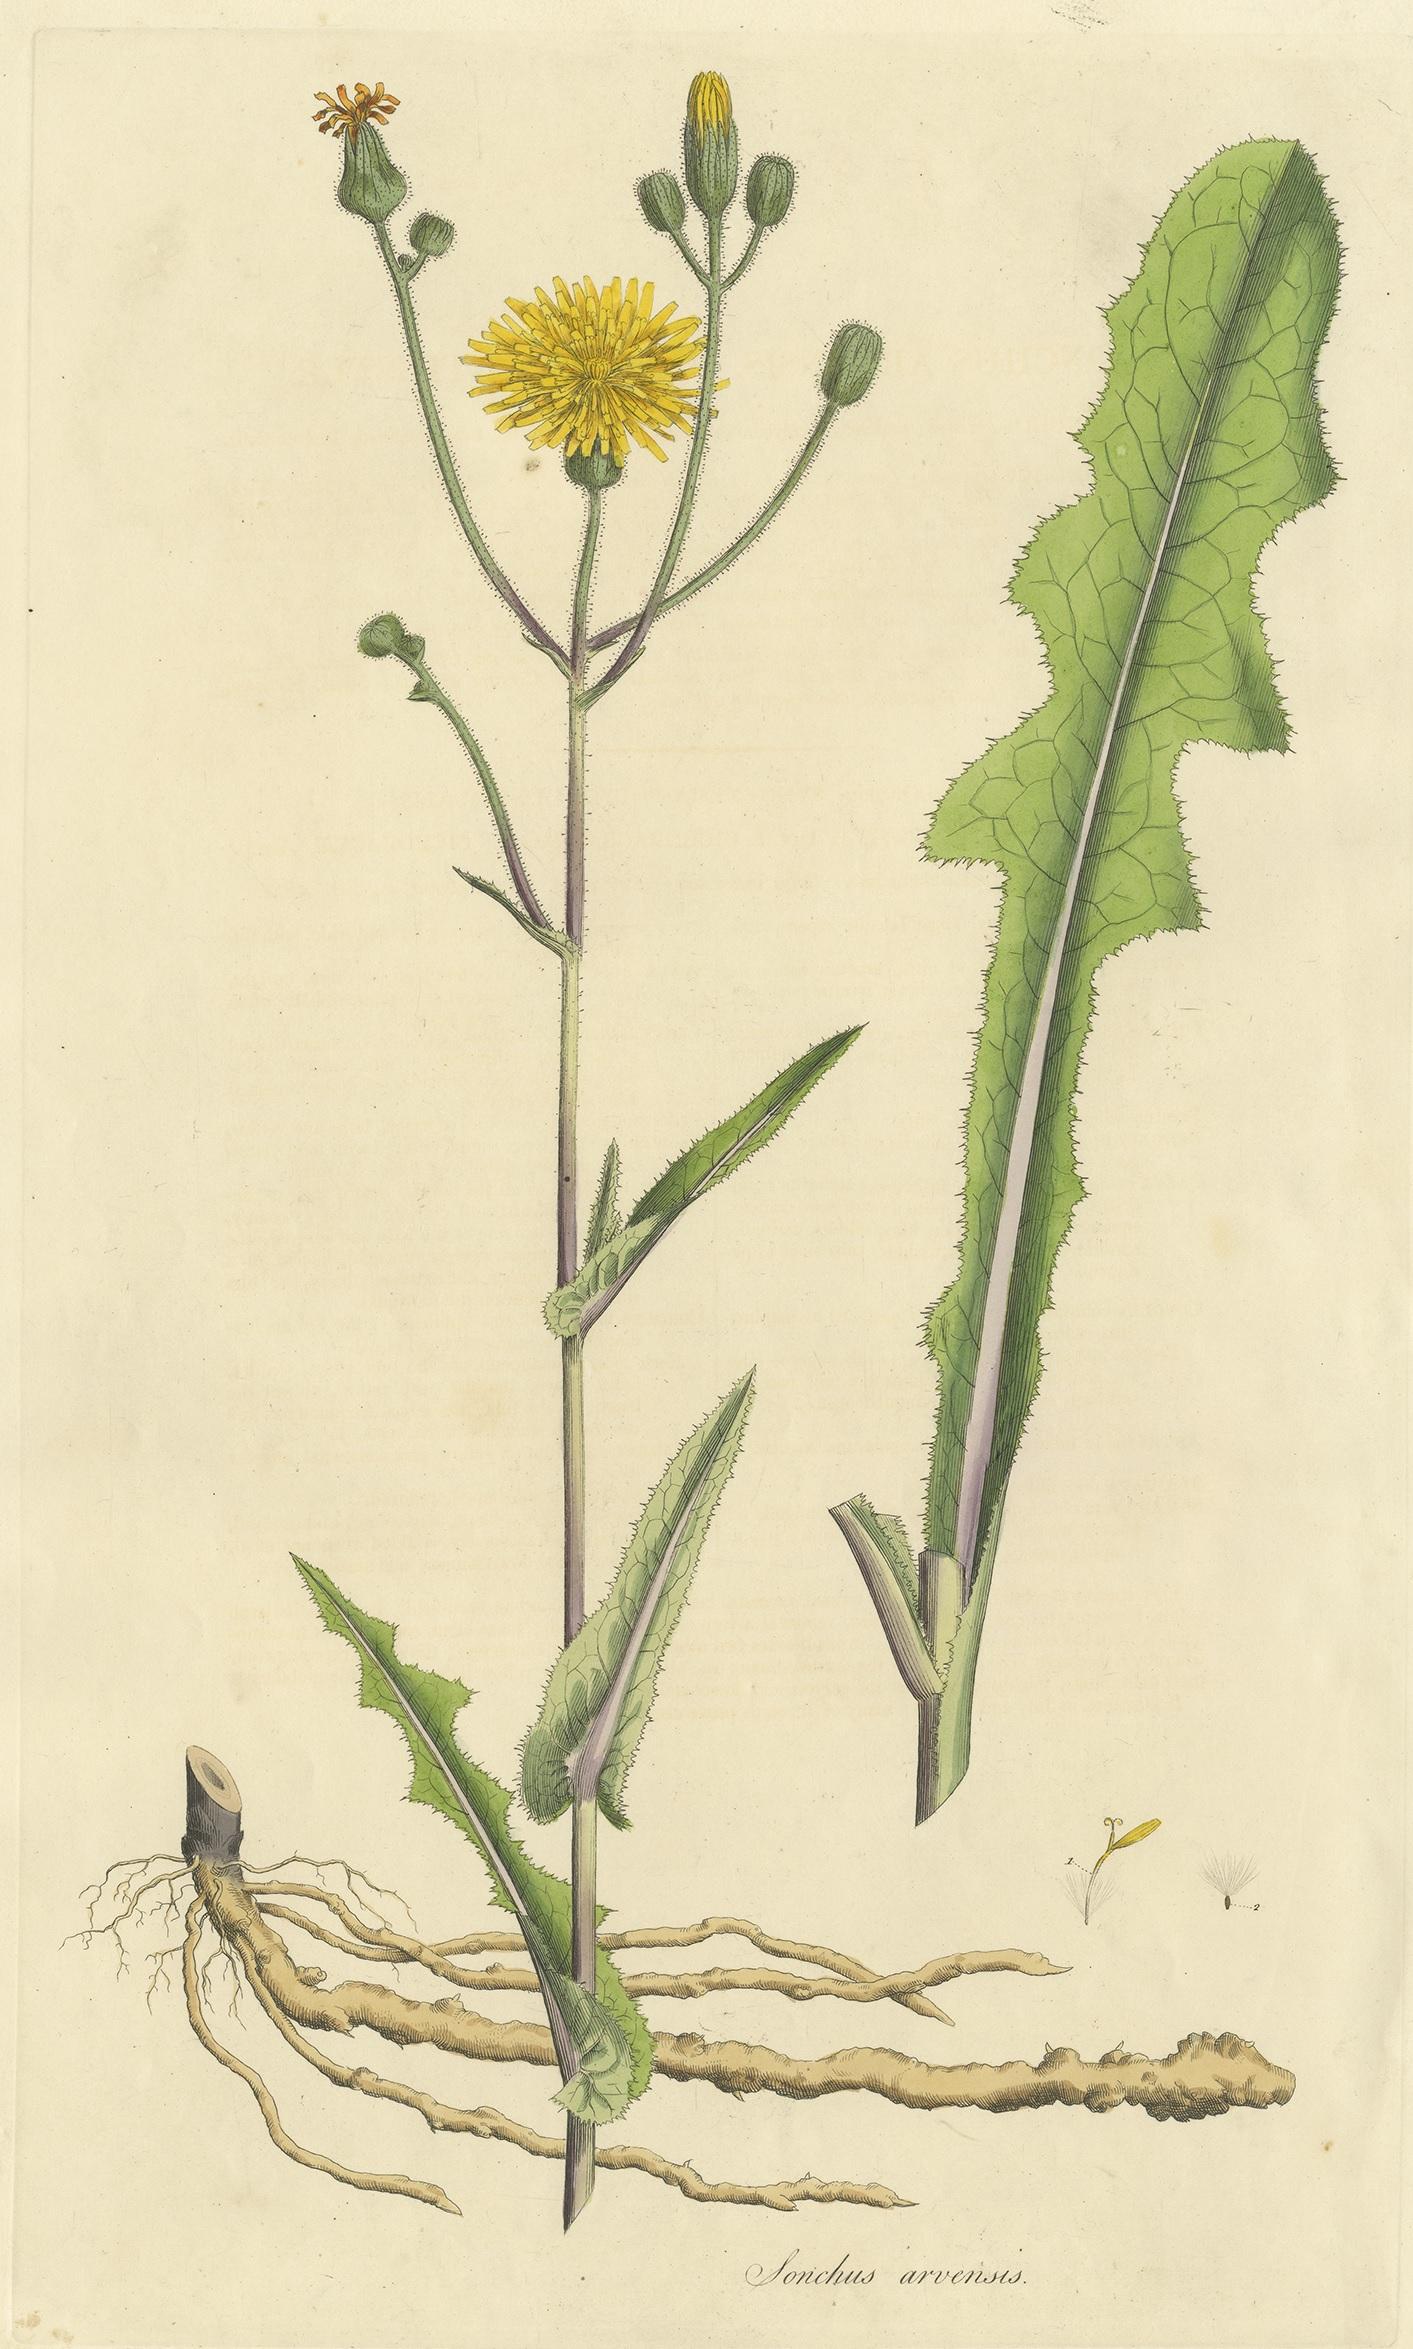 Antique botany print titled 'Sochus Arvensis'. Hand colored engraving of the sonchus arvensis, also known as the field milk thistle, field sow thistle, perennial sow-thistle, corn sow thistle, dindle, gutweed, swine thistle, or tree sow thistle.